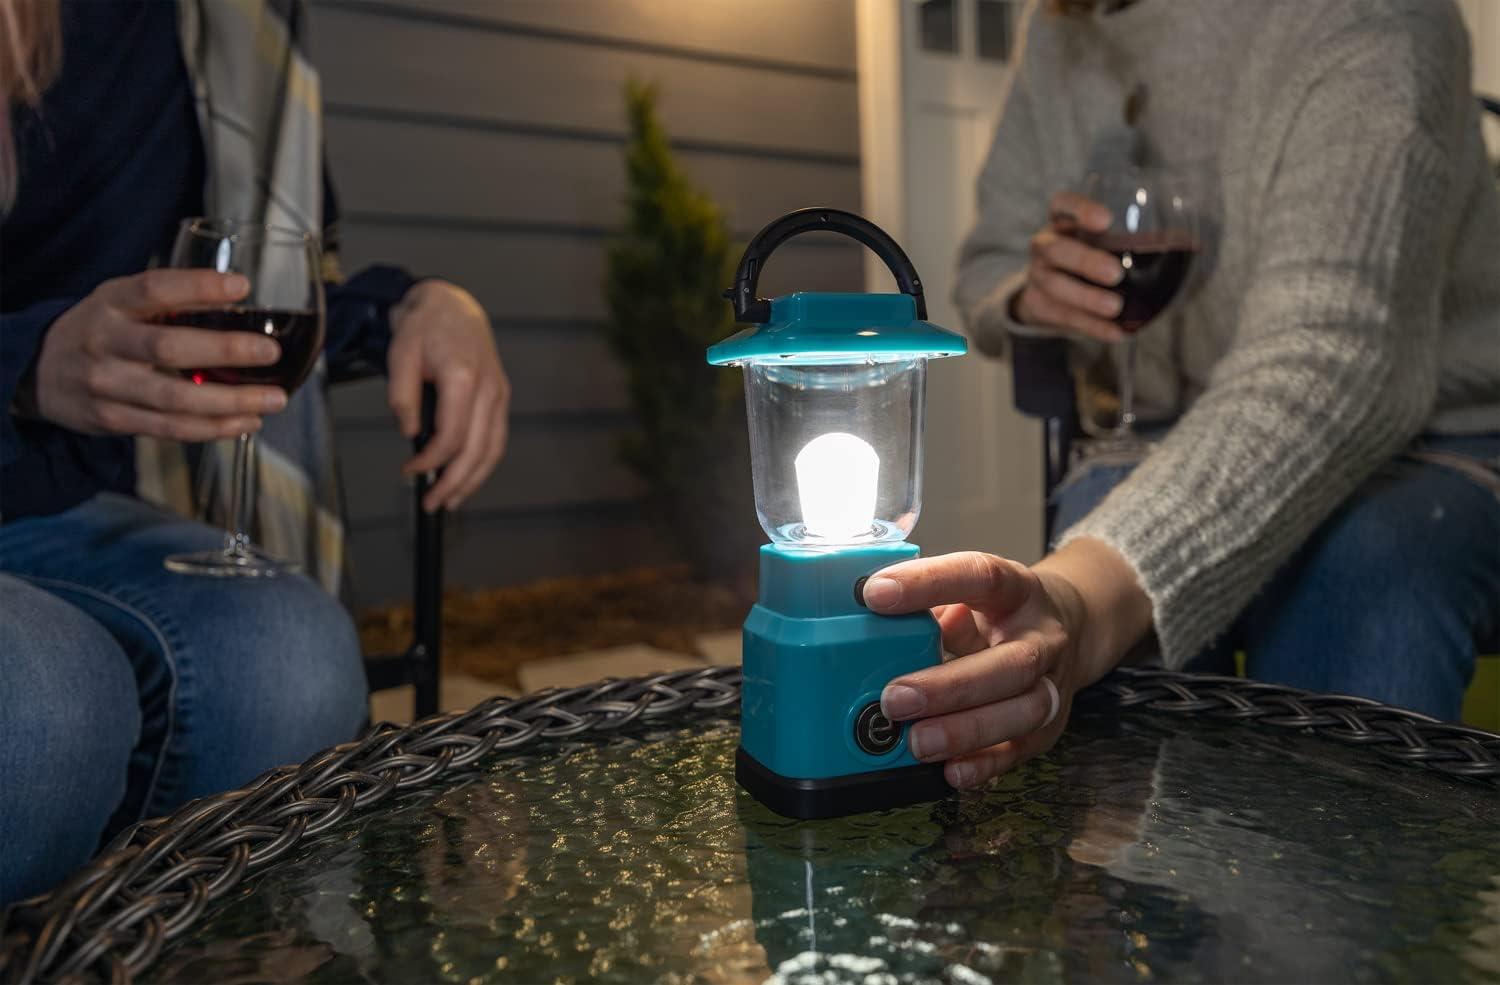 Enbrighten LED Mini Camping Lantern, Battery Powered, 200 Lumens, 40 Hour  Runtime, 3 Modes, Night Light for Kids, Ideal for Hiking, Outdoors,  Emergency, Snow, Hurricane and Storm Teal